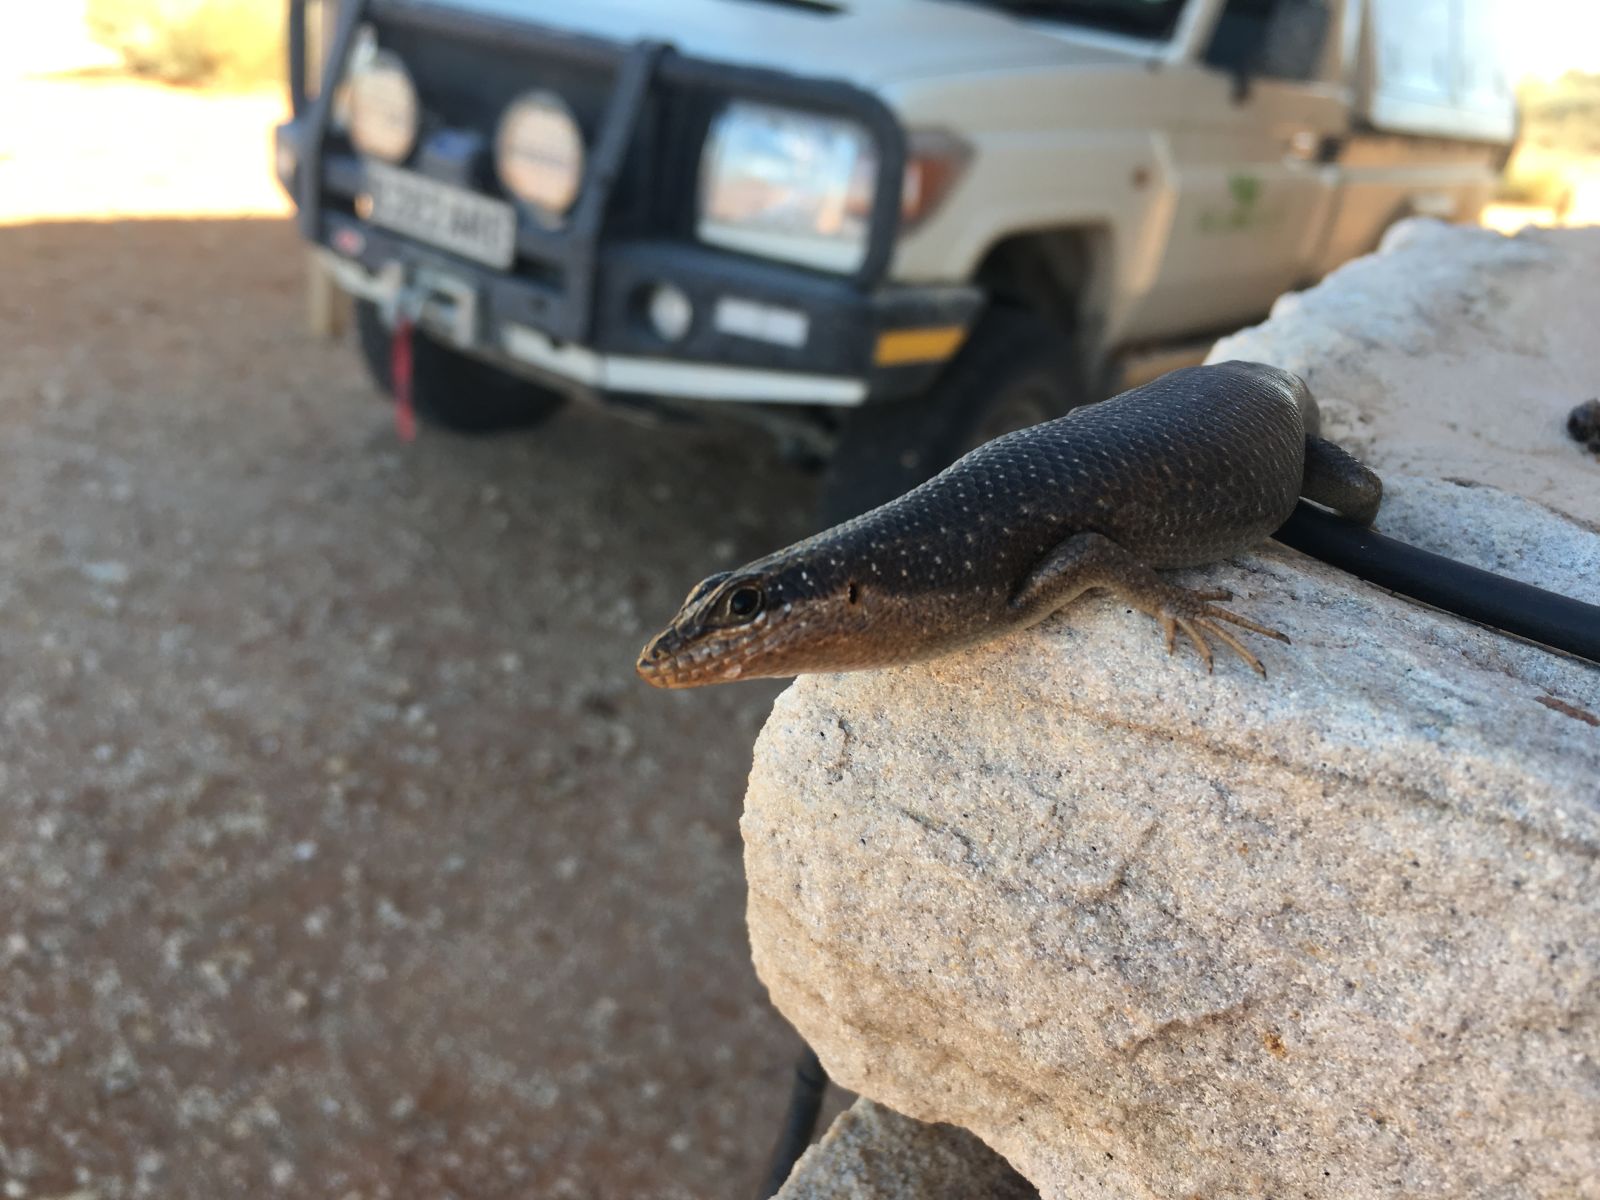 My skink friend here approves.